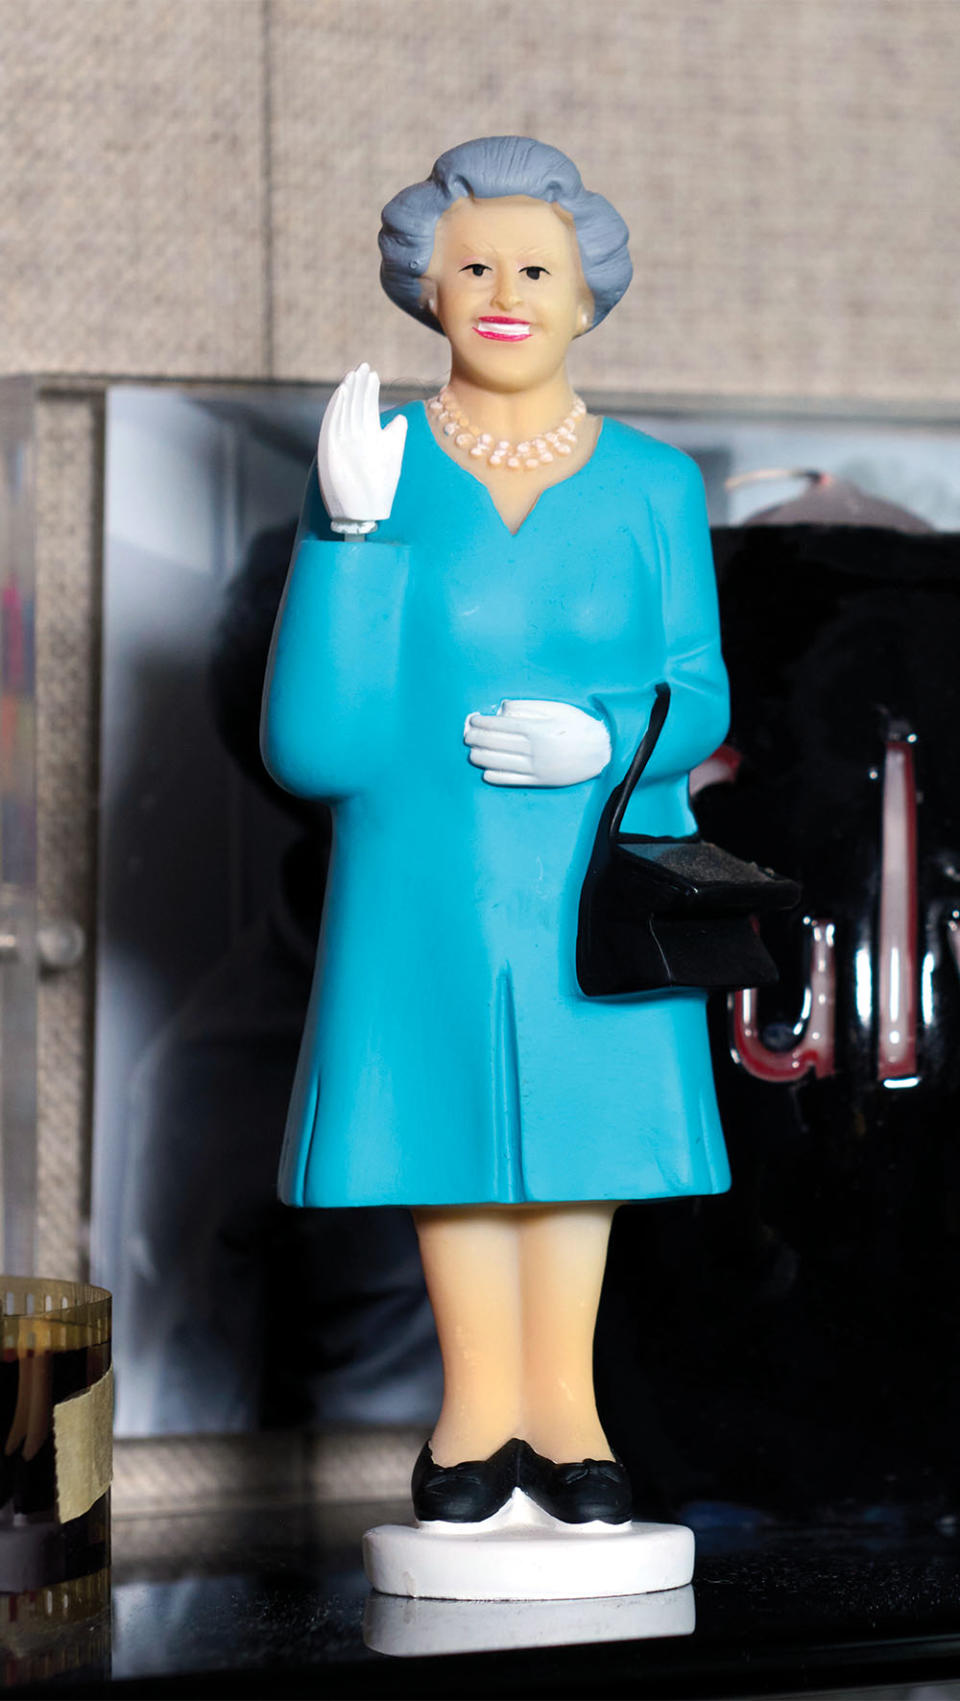 A figurine of Queen Elizabeth II: “I am very British, and it’s her jubilee celebration.” - Credit: Photographed by Yasara Gunawardena